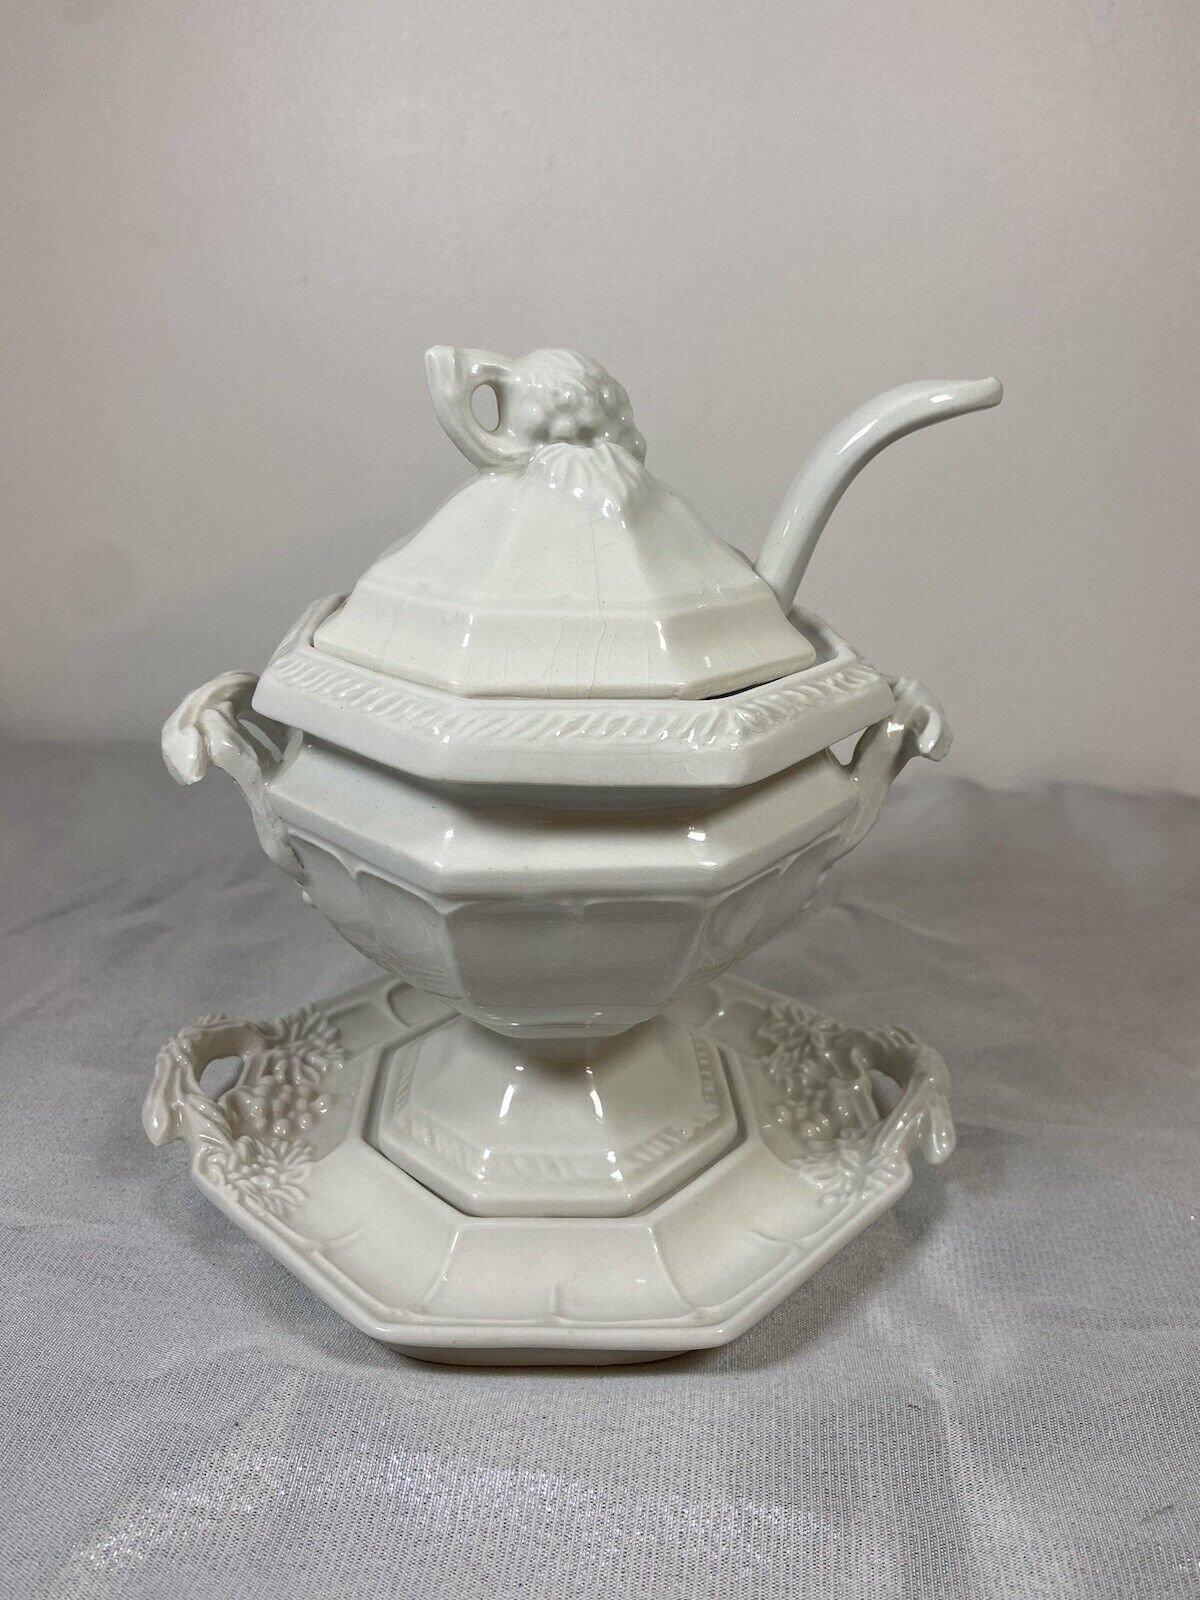 Red Cliff Ironstone Soup Tureen with Grape Motif Vintage